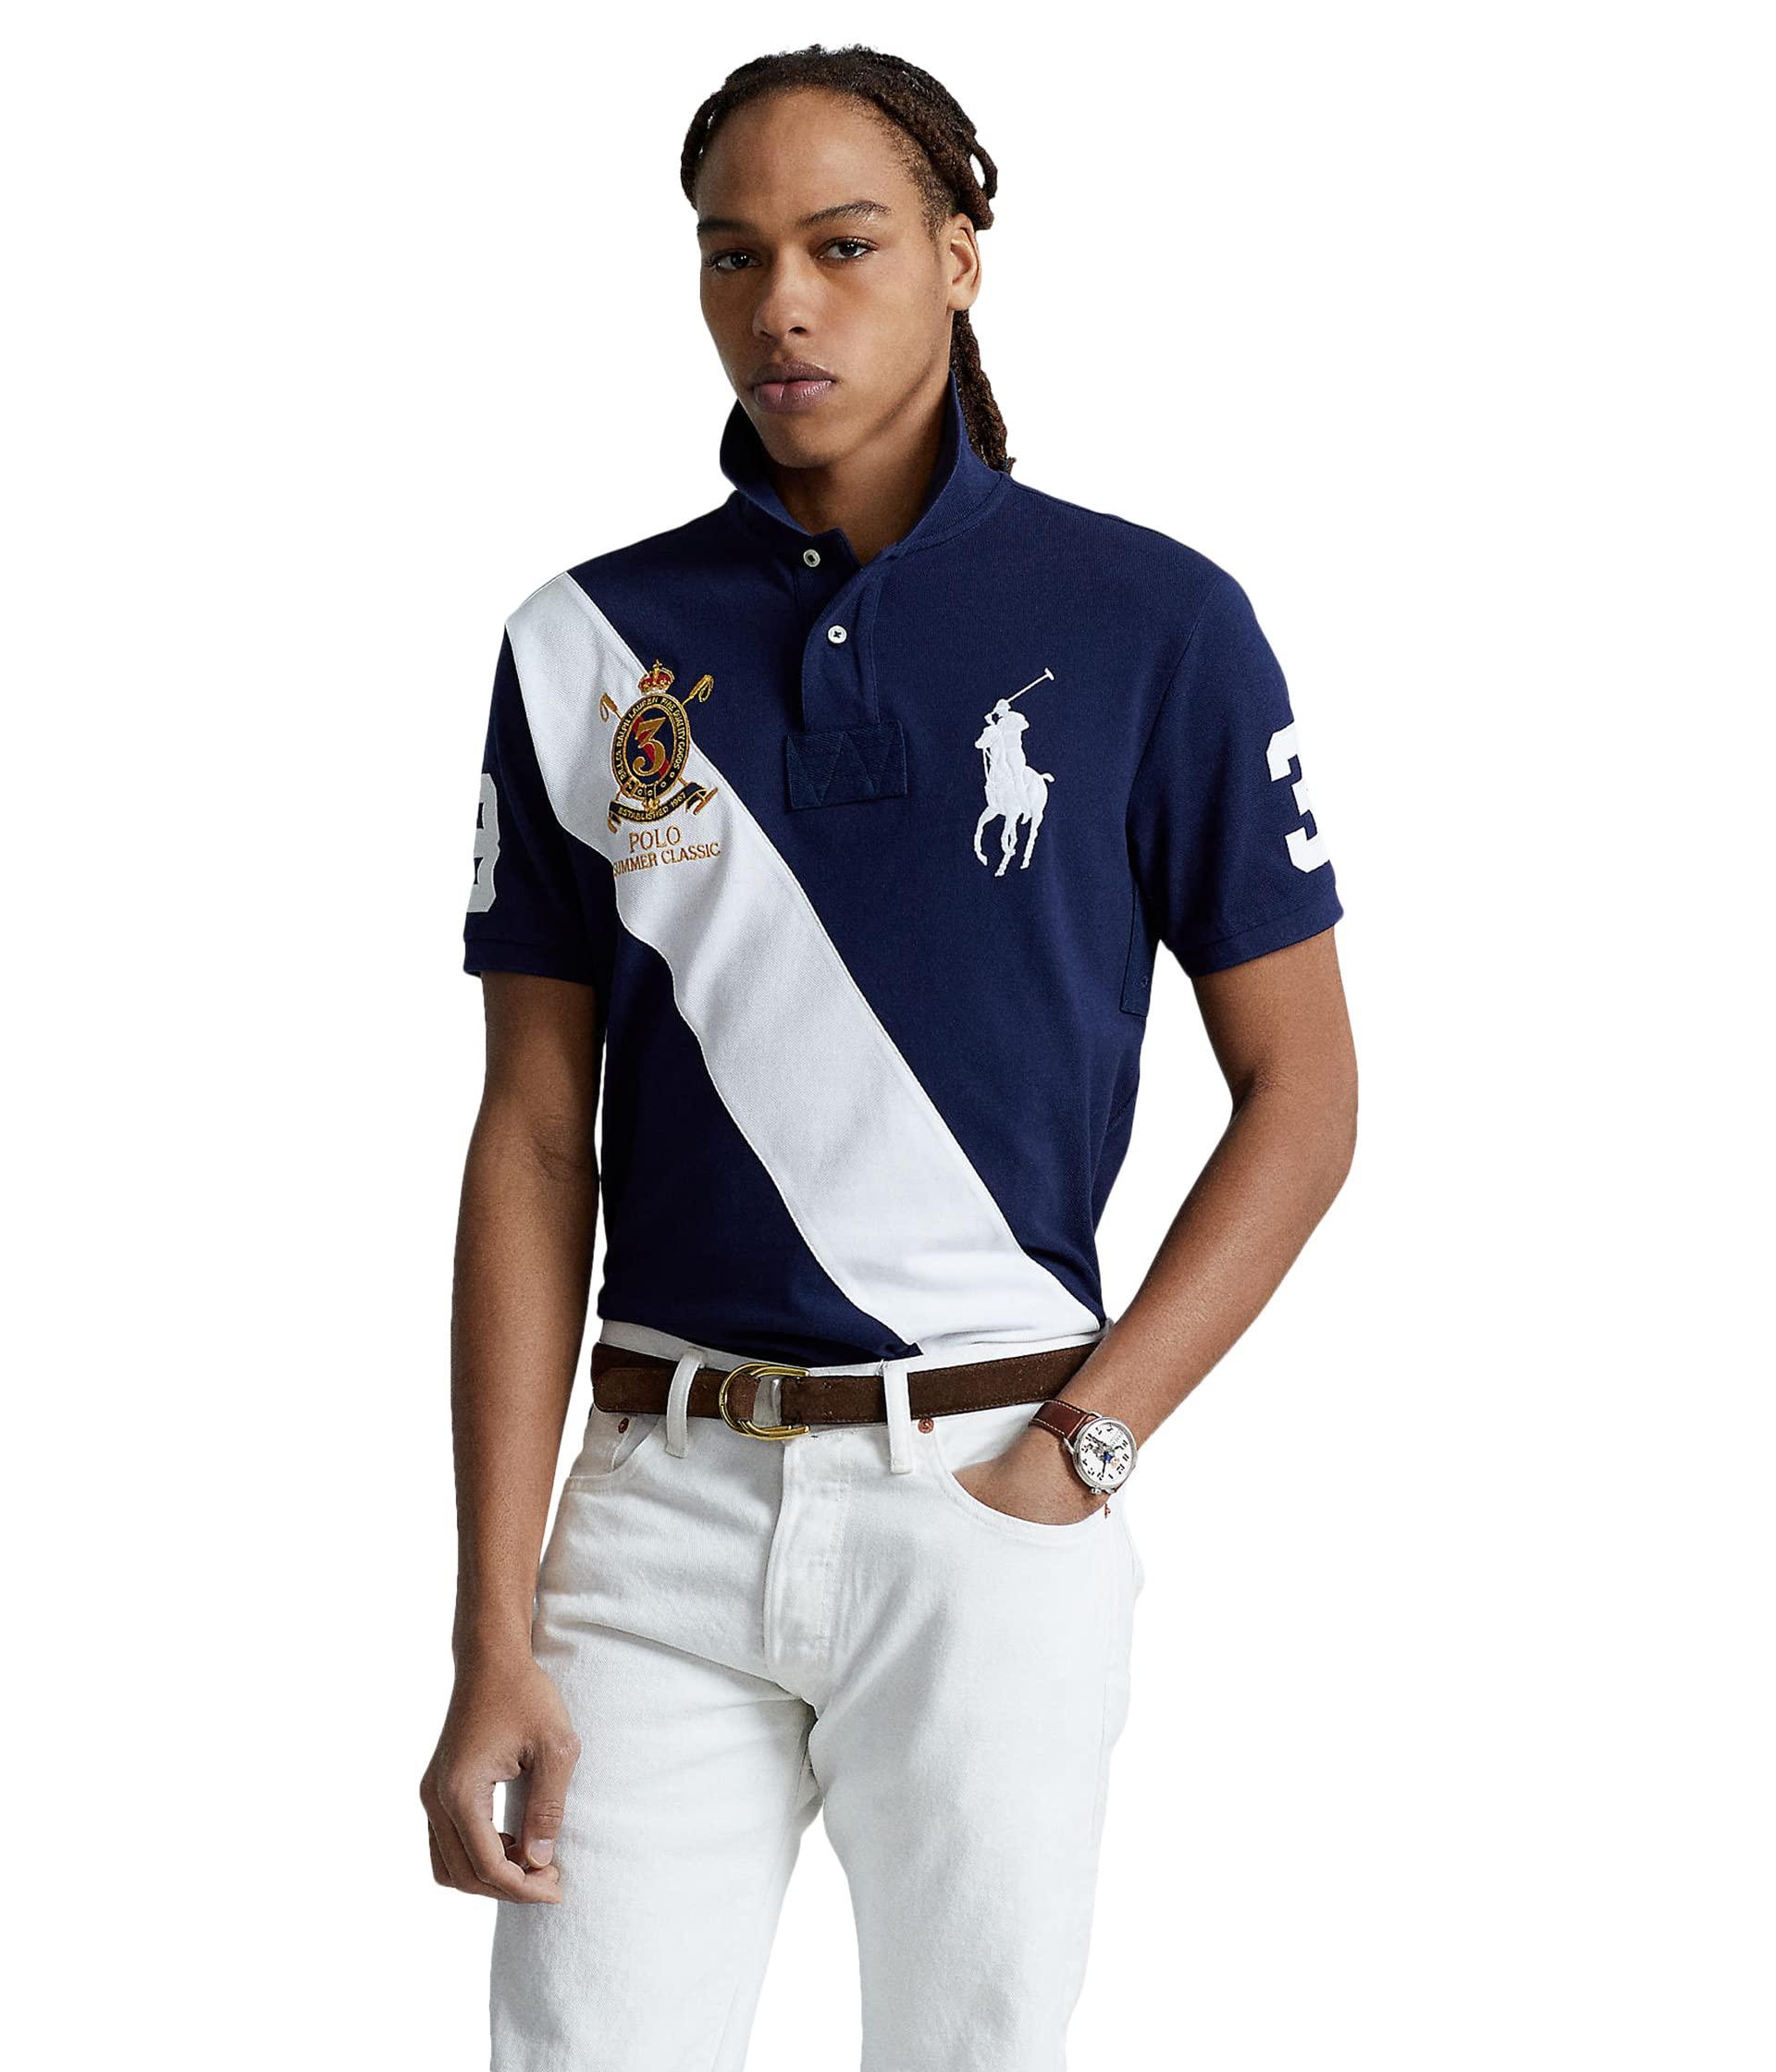 Polo Ralph Lauren Classic Fit Big Pony Polo Shirt in Blue for Men